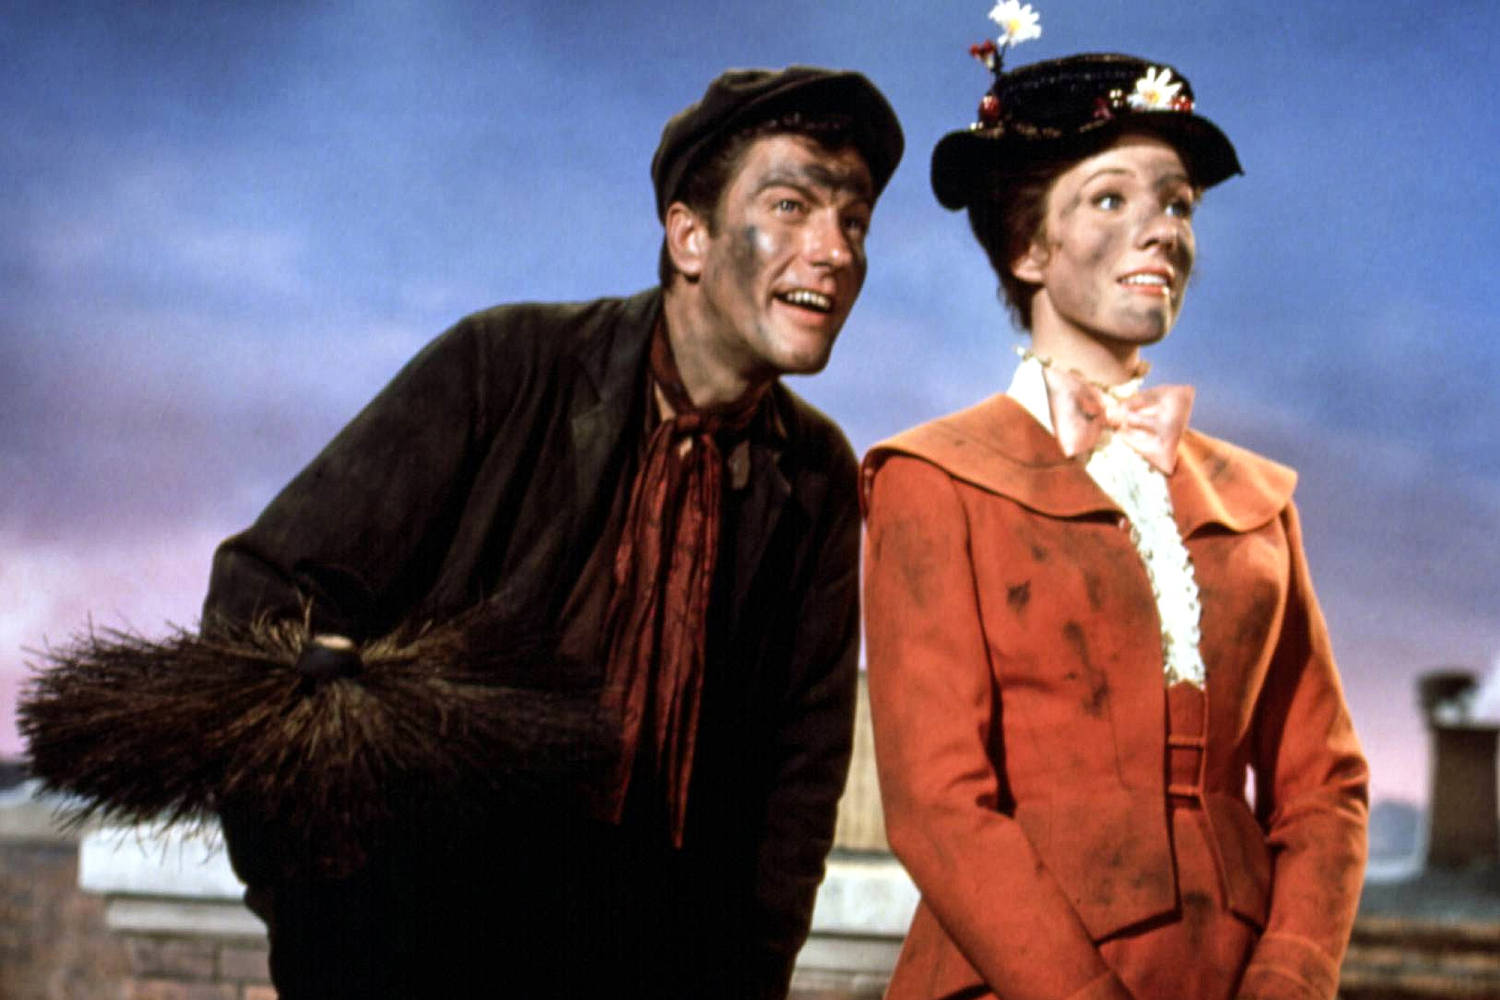 'Mary Poppins' age rating increased in U.K. due to 'discriminatory language' 